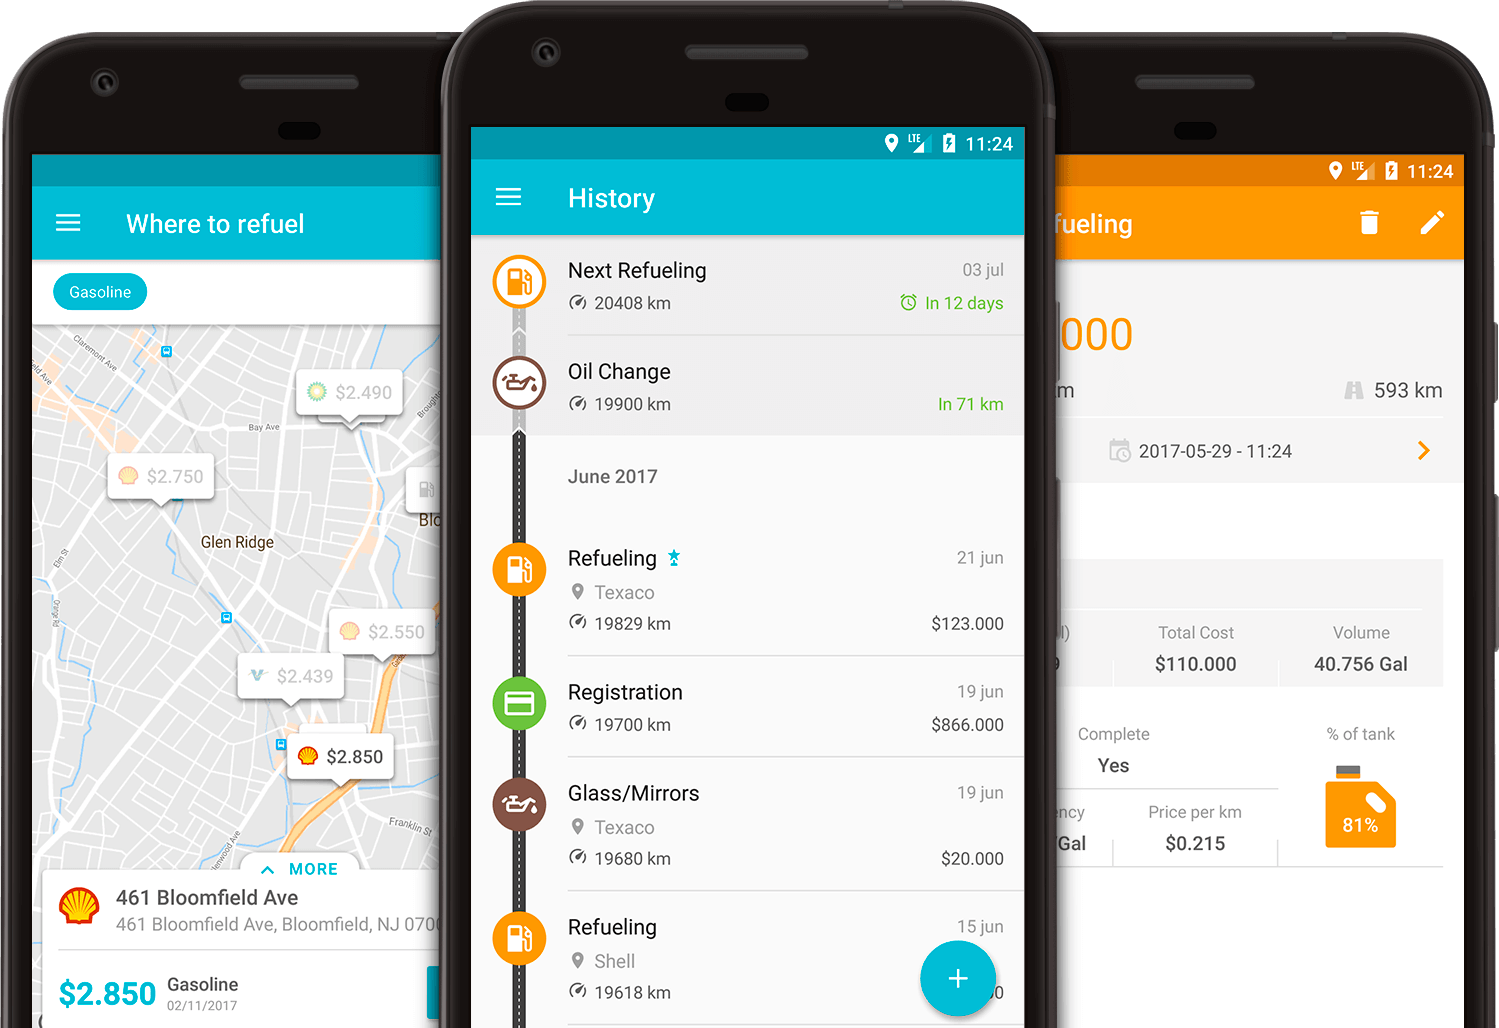 The Best Android Apps with which you can Find the Cheapest Petrol or Fuel